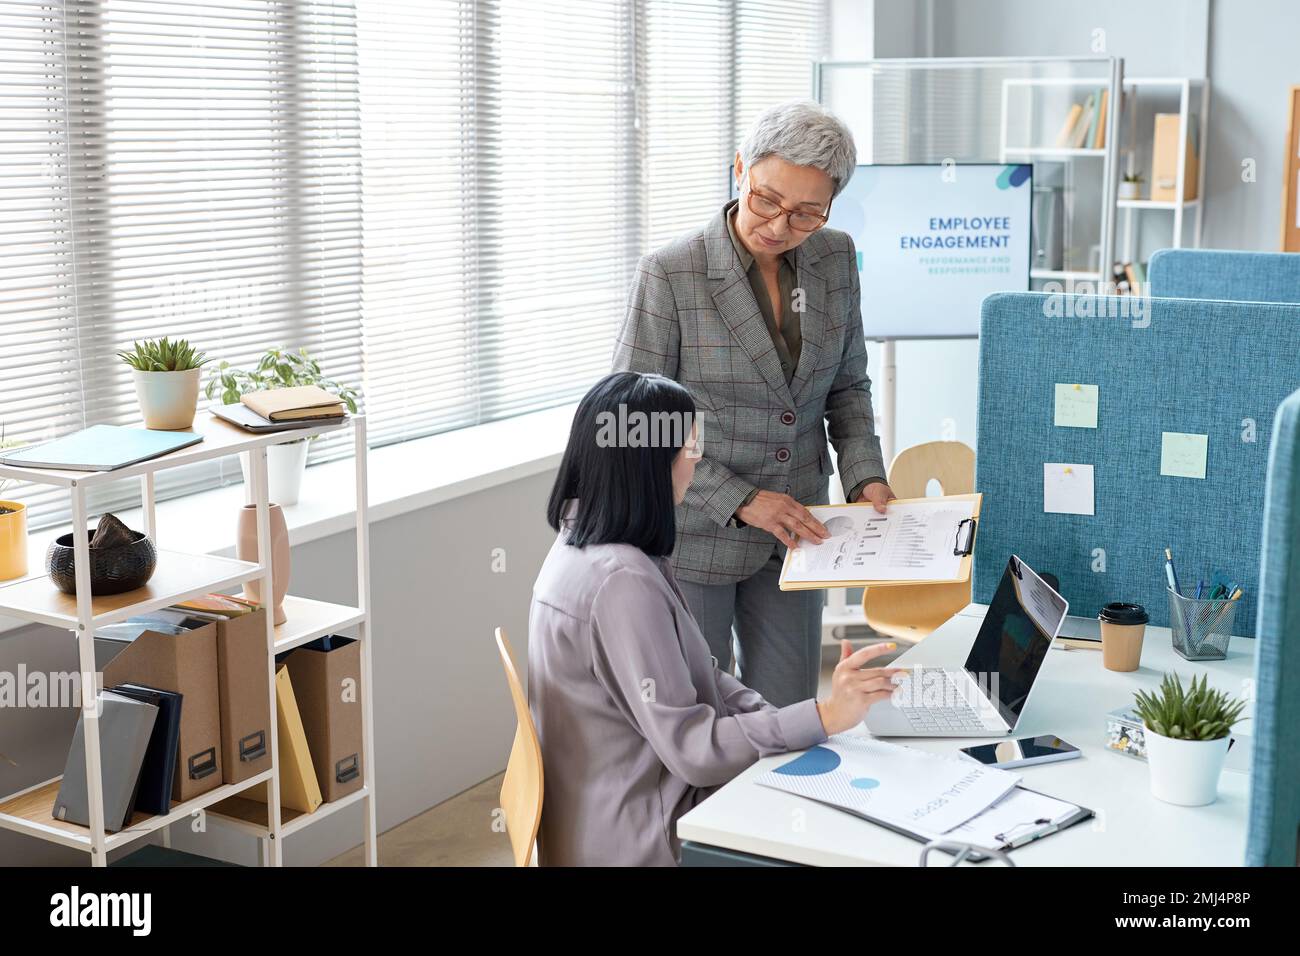 Portrait of senior business manager instructing employees in office setting, copy space Stock Photo